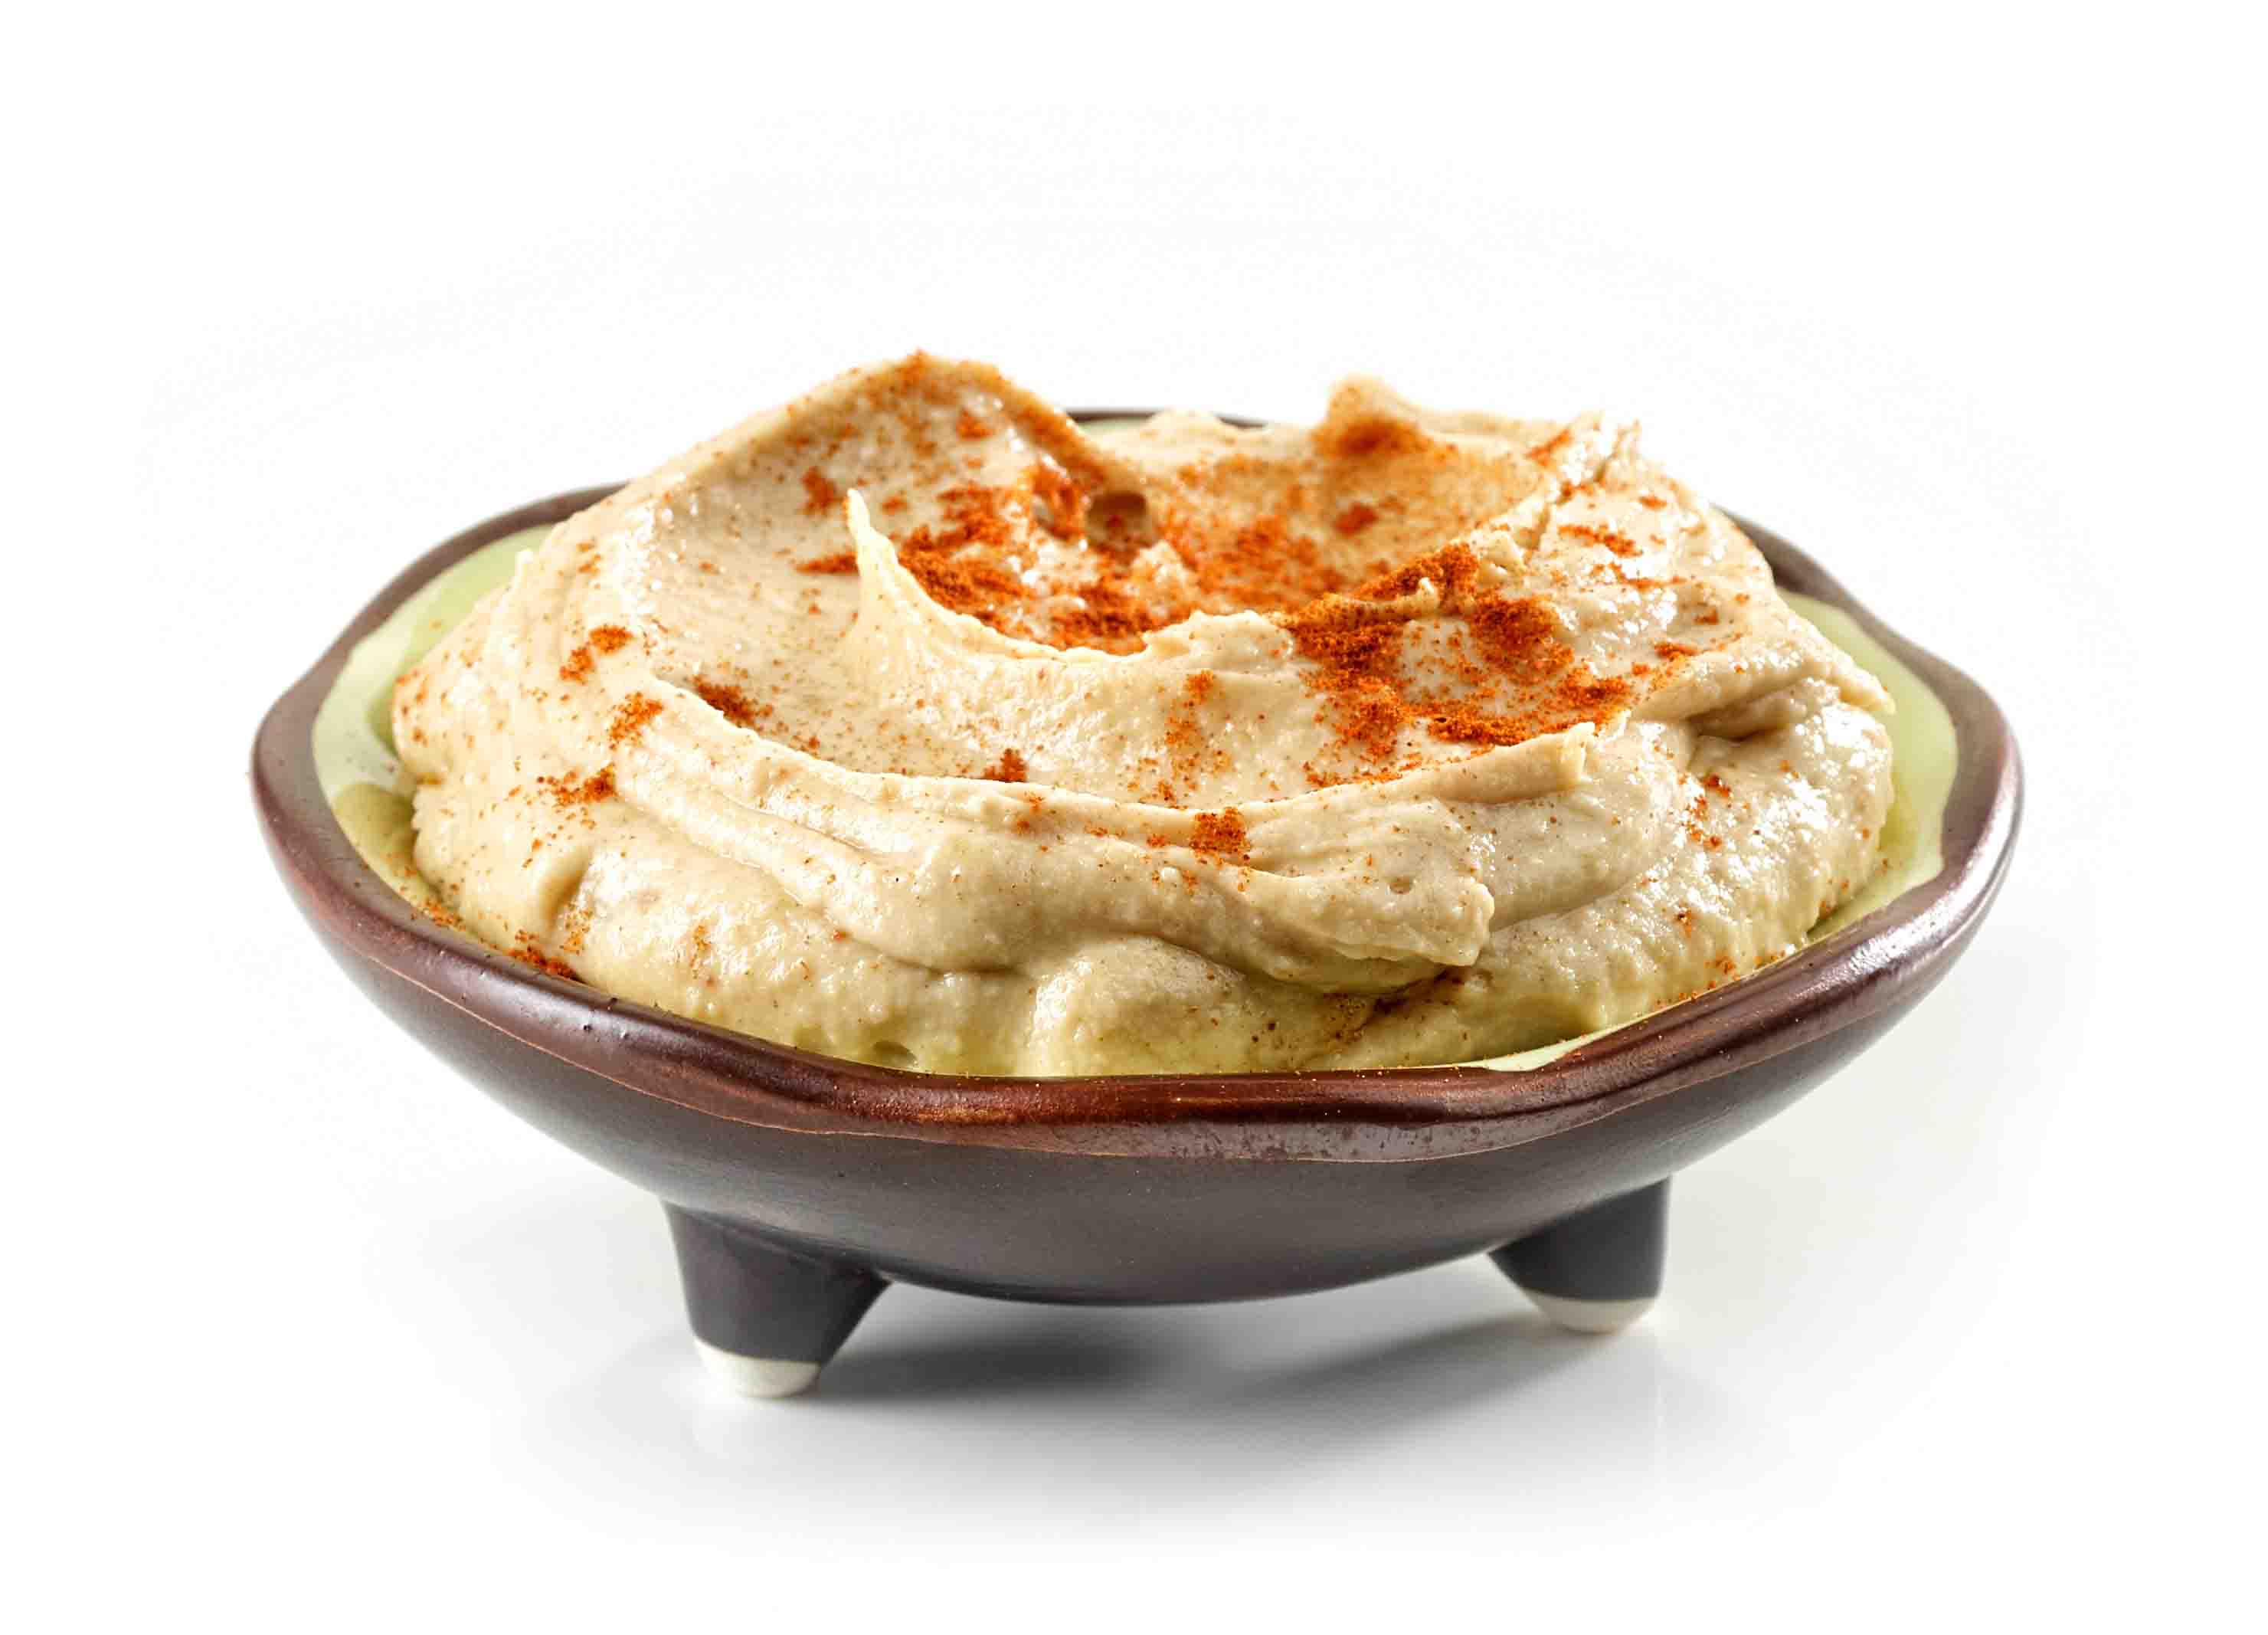 hummus 1 - Oil-Free Hummus Recipe Roundup: All the Flavor Without the Added Fat